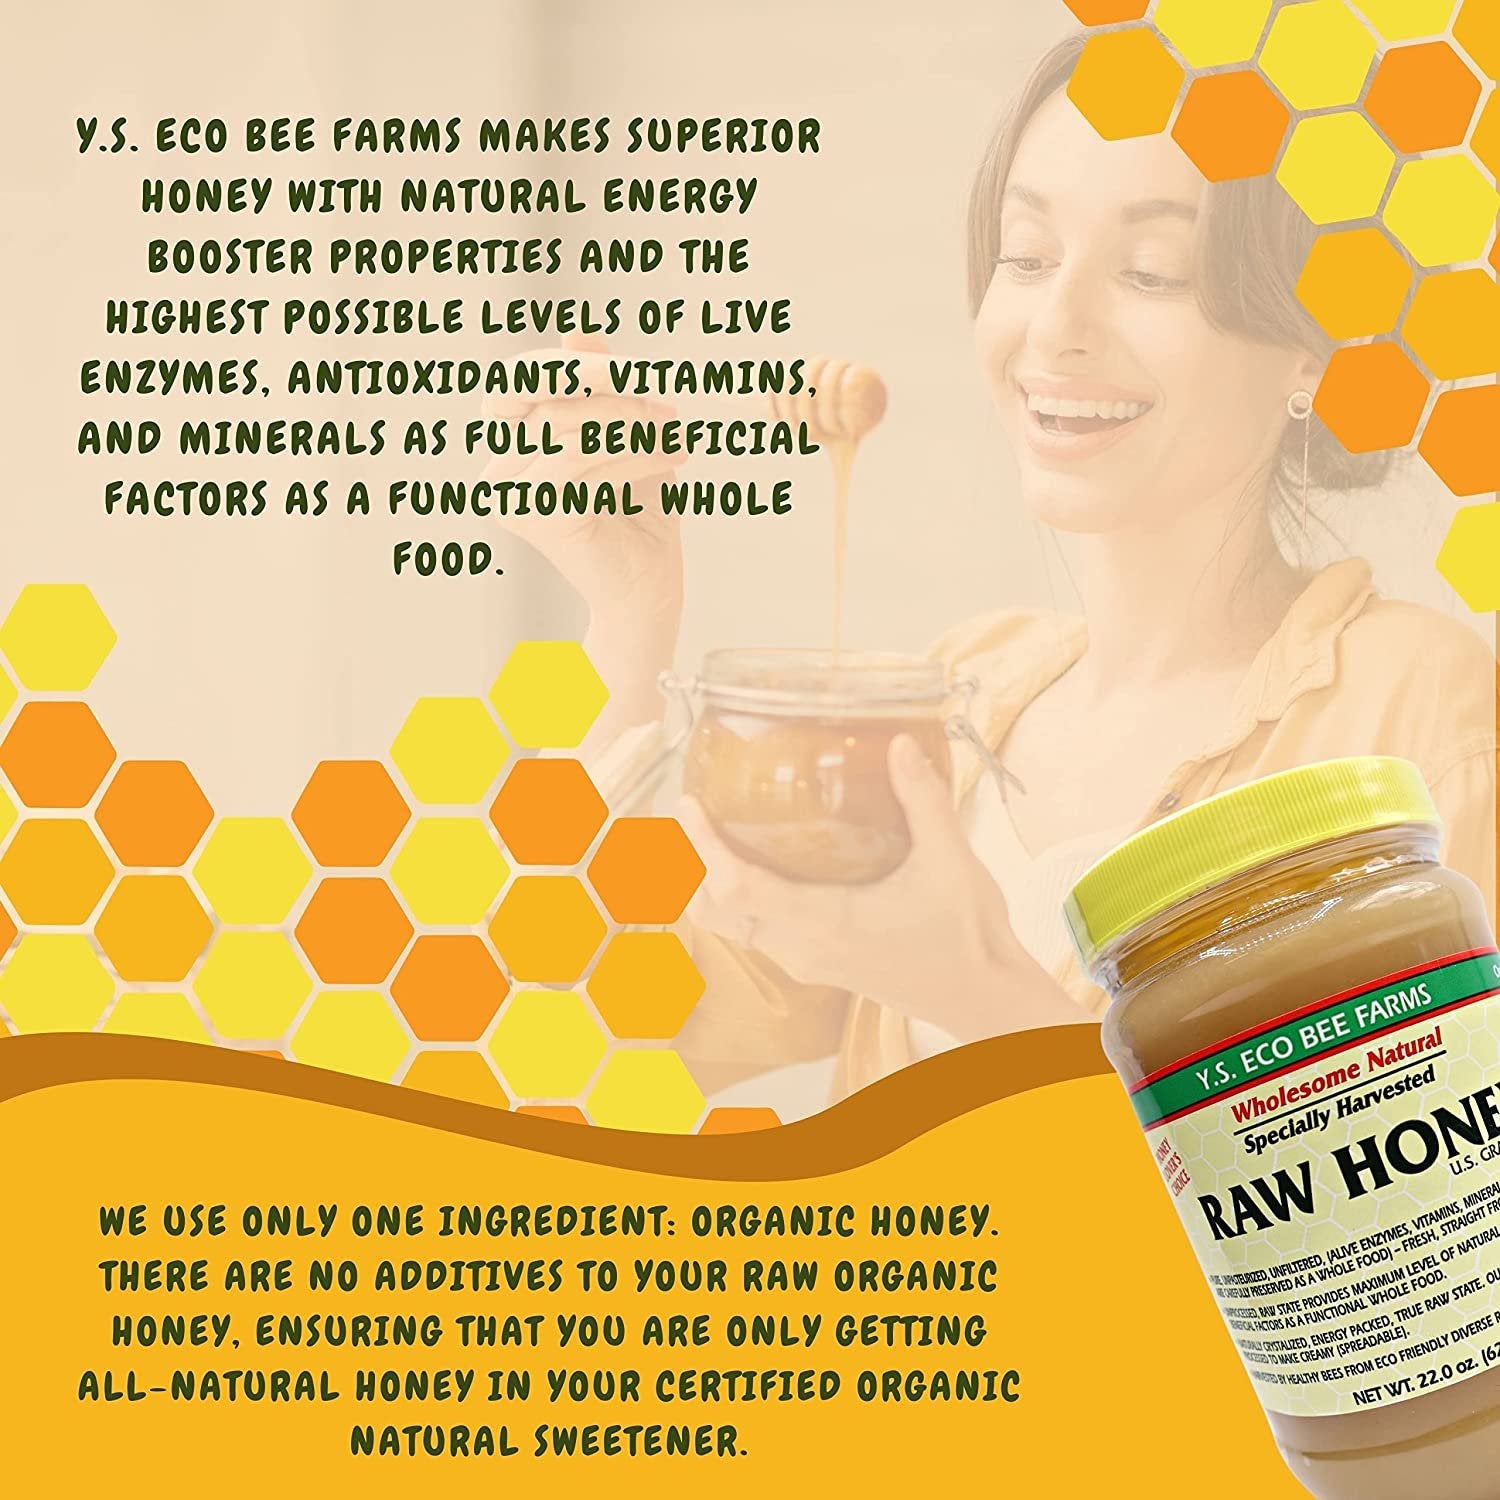 Y.S. Eco Bee Farms, Y.S. Organic Bee Farms, Wholesome Natural Raw Honey, Unpasteurized, Unfiltered, Fresh Raw State, Kosher, Pure, Natural, Healthy, Safe, Gluten Free, Specially Harvested, 22oz - 4pk